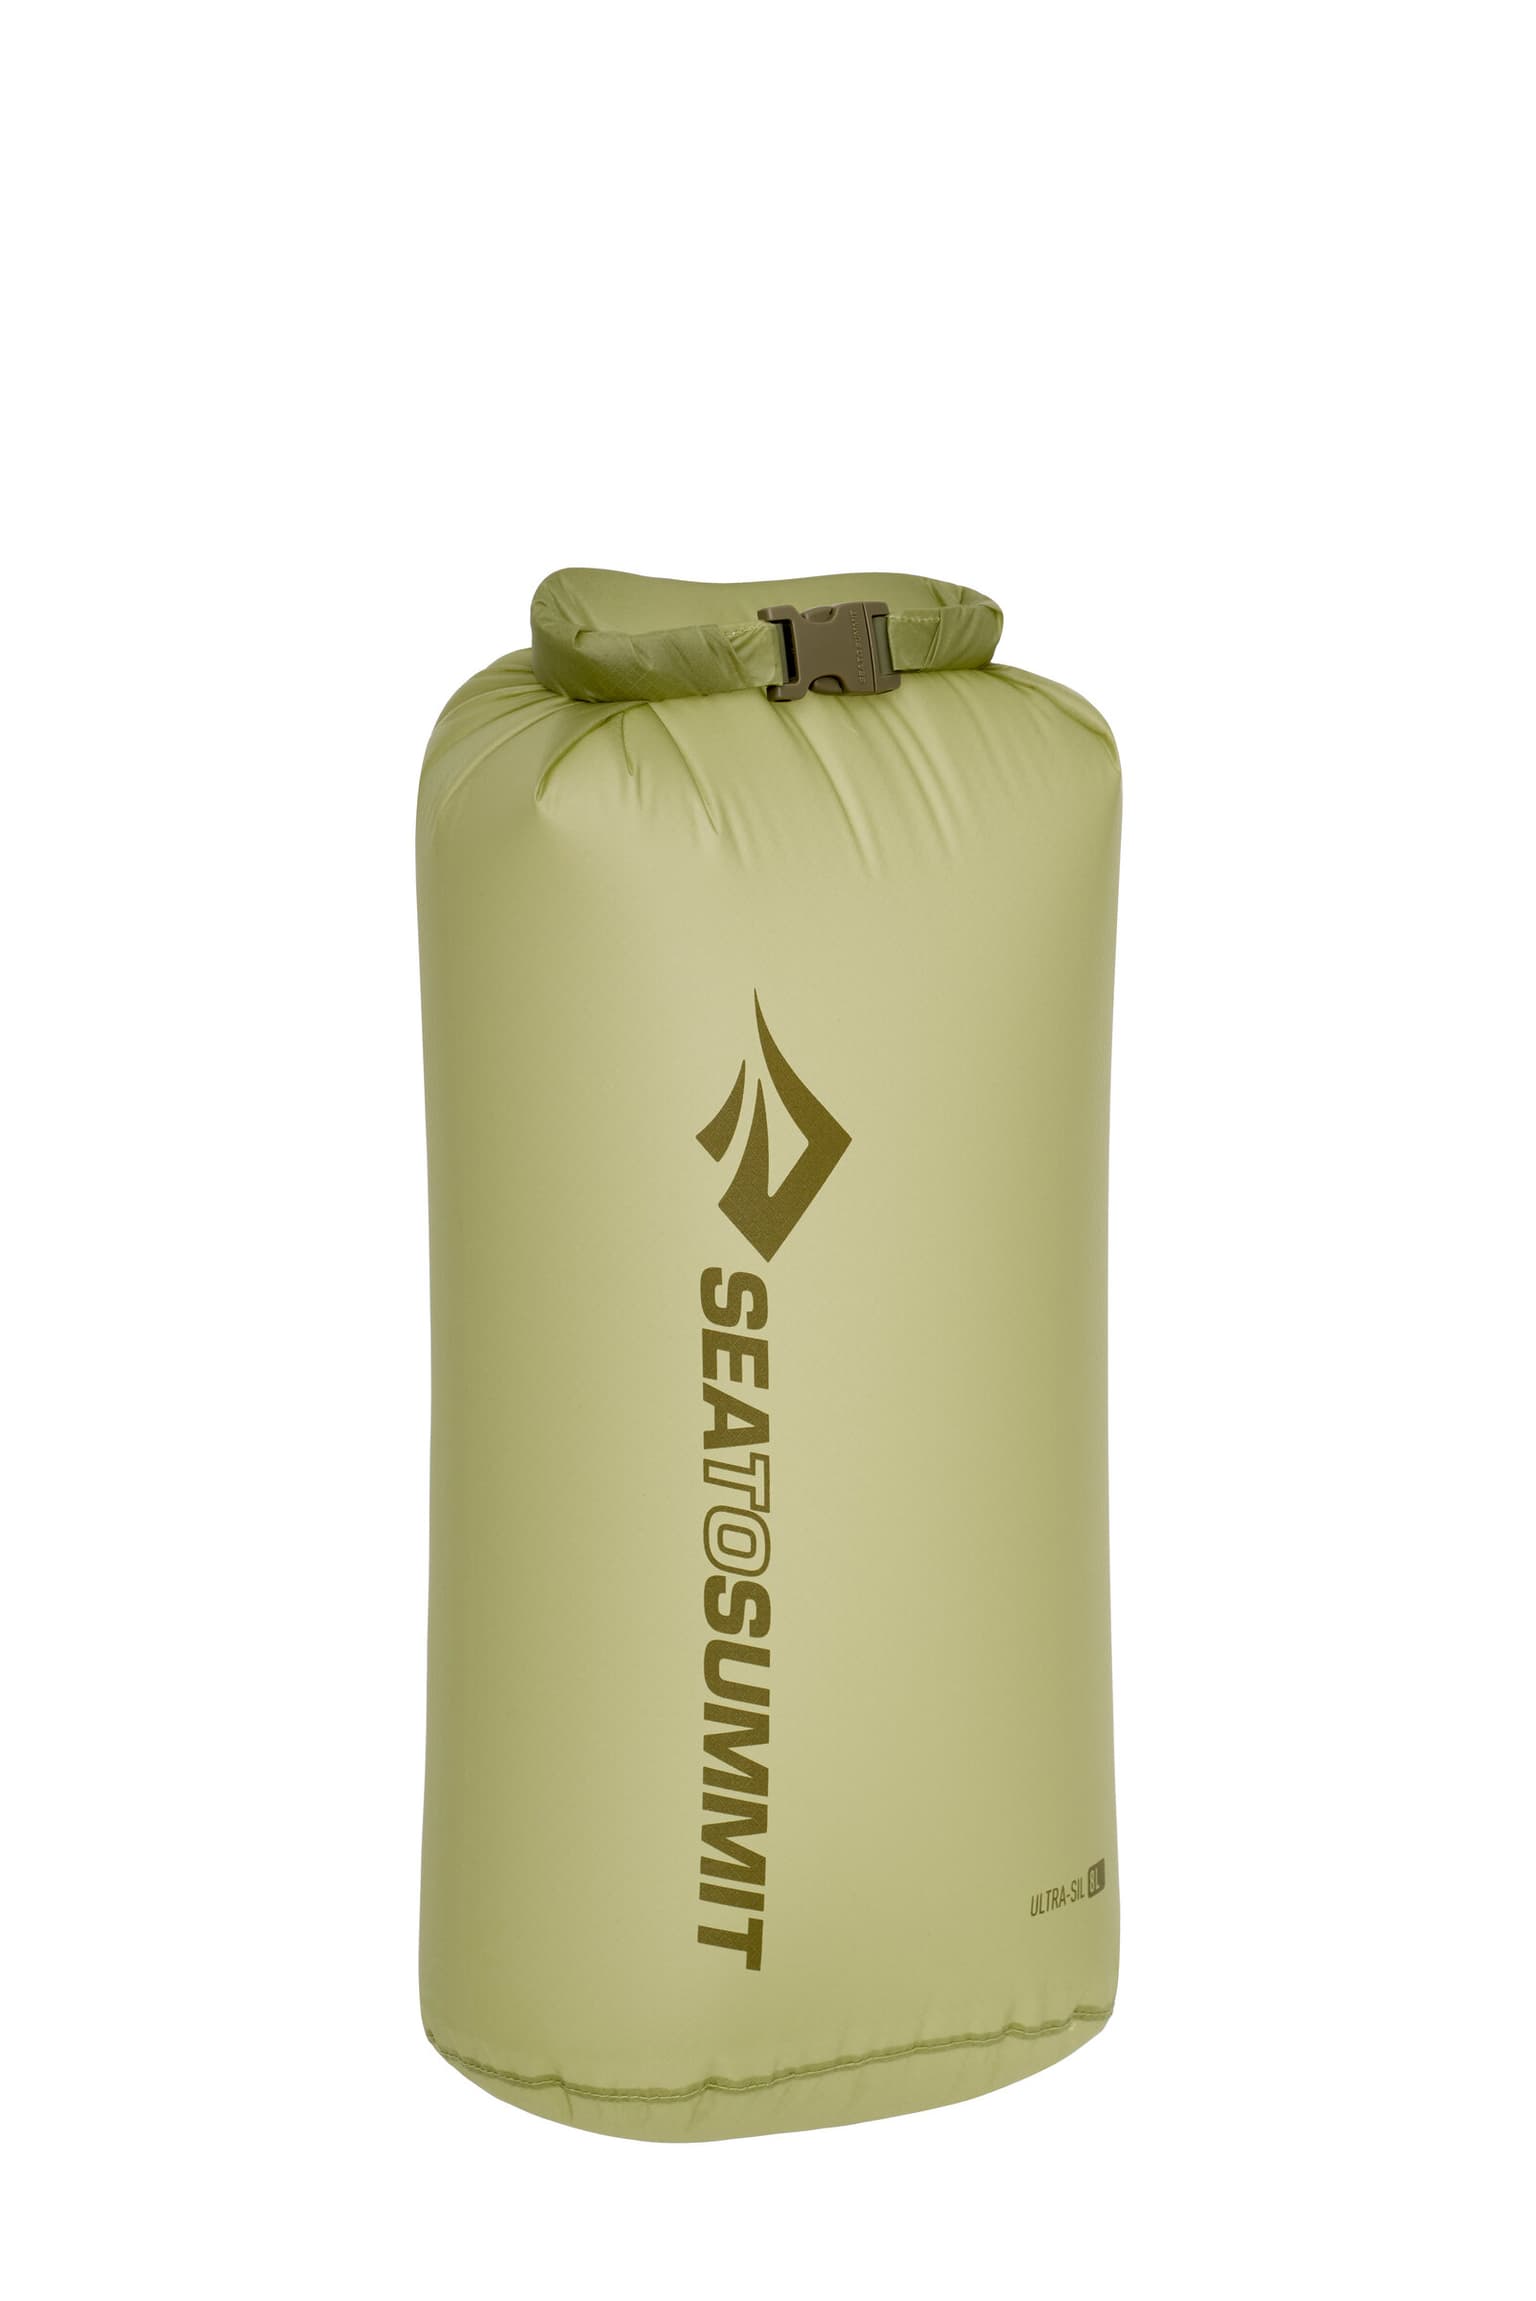 Sea To Summit Sea To Summit Ultra-Sil Dry Bag 13L Dry Bag verde-muschio 1